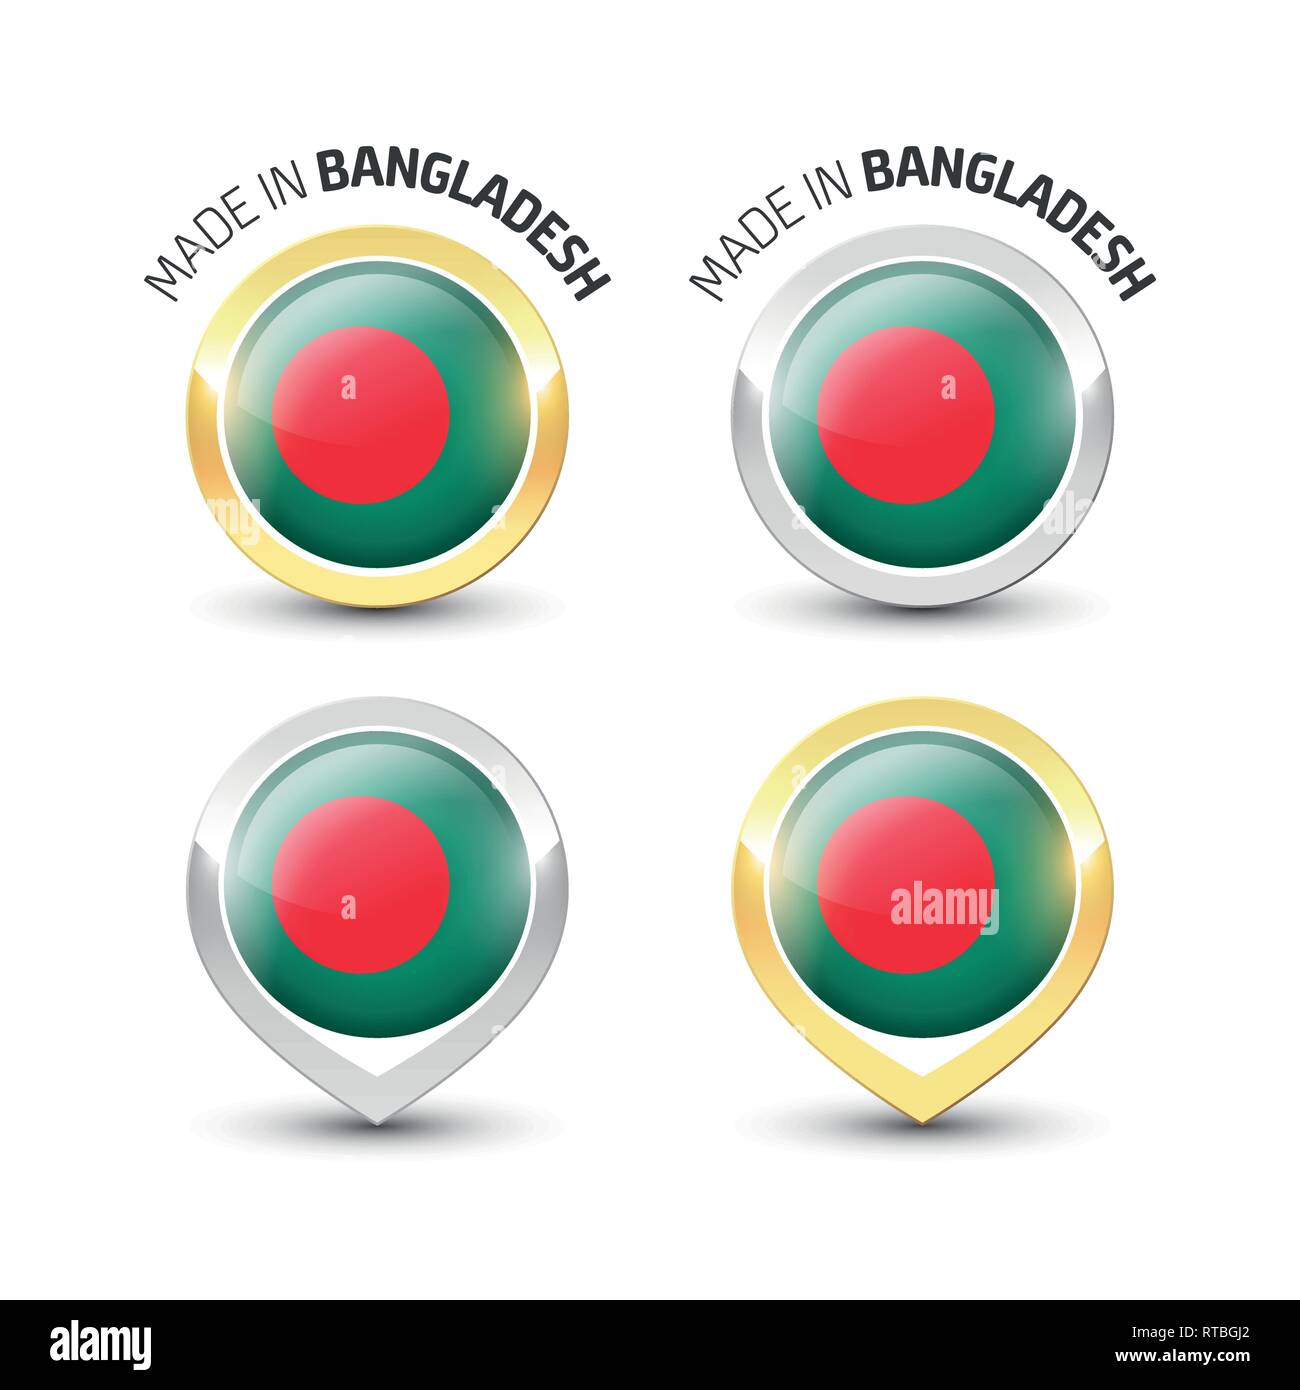 Made in Bangladesh - Guarantee label with the flag of Bangladesh inside round gold and silver icons. Stock Vector